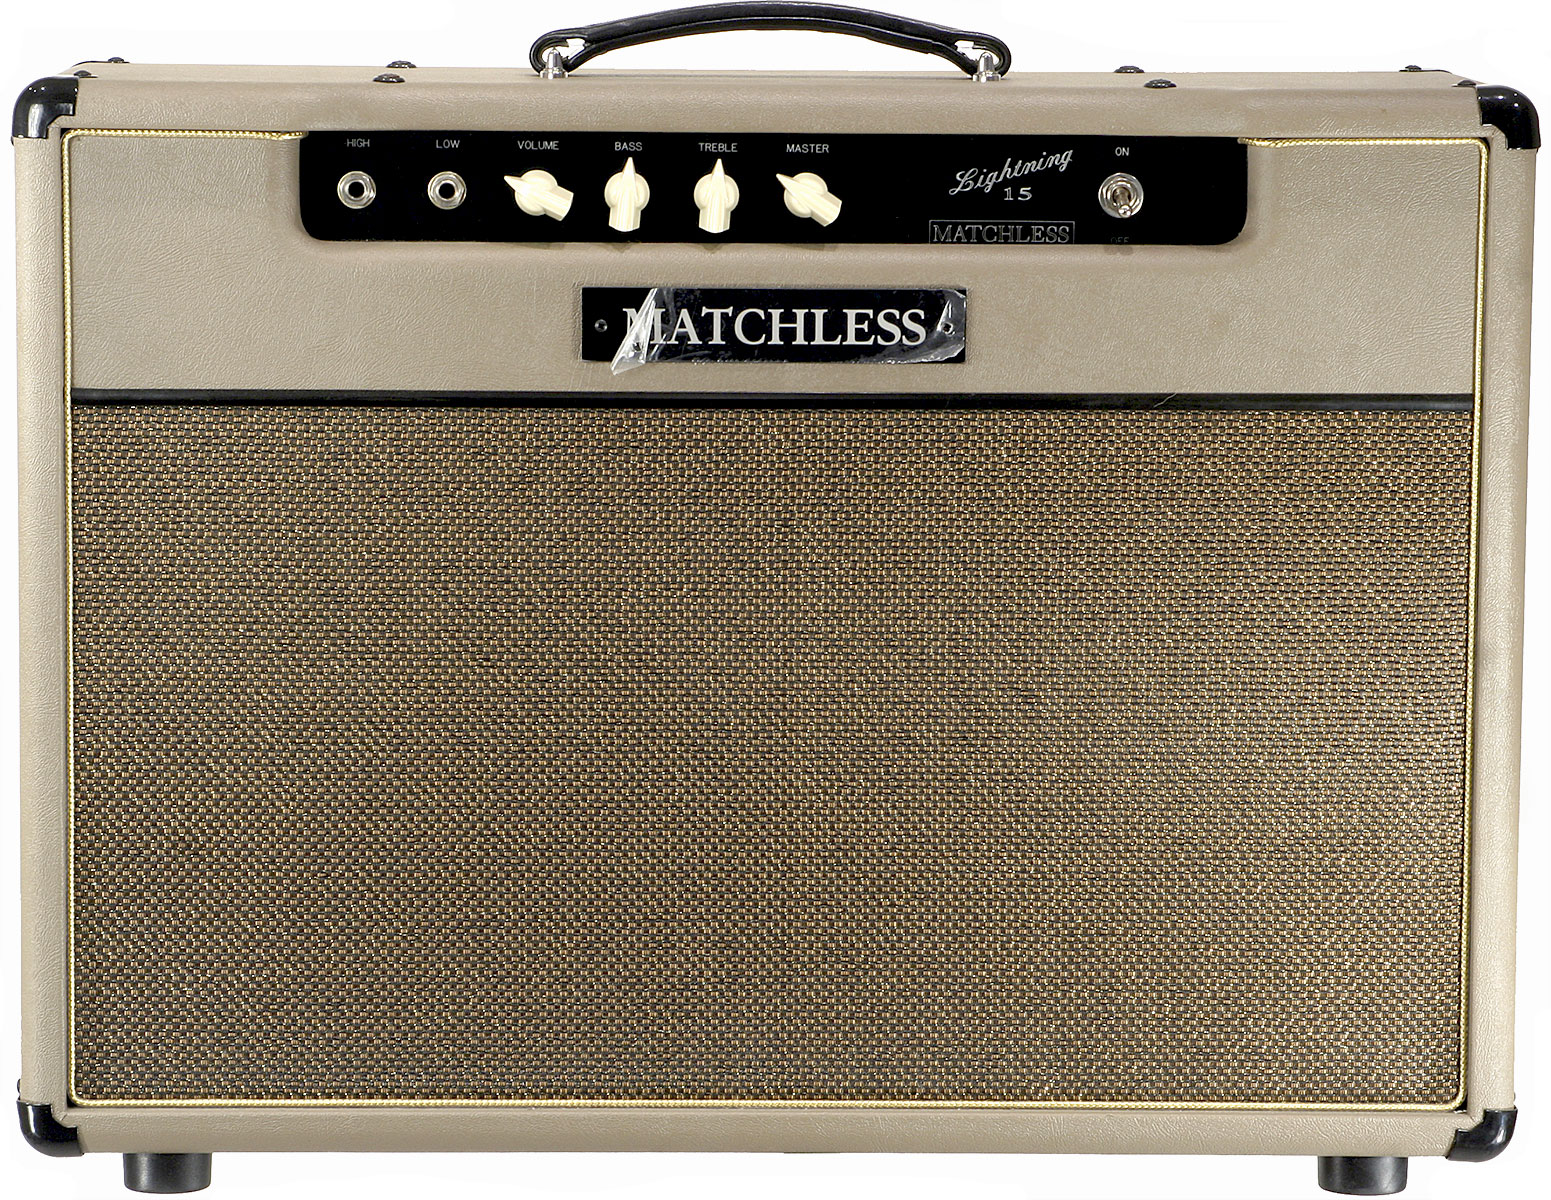 Matchless Avalon 30 112 Reverb 1x12 30w Cappuccino/gold - Electric guitar combo amp - Variation 3